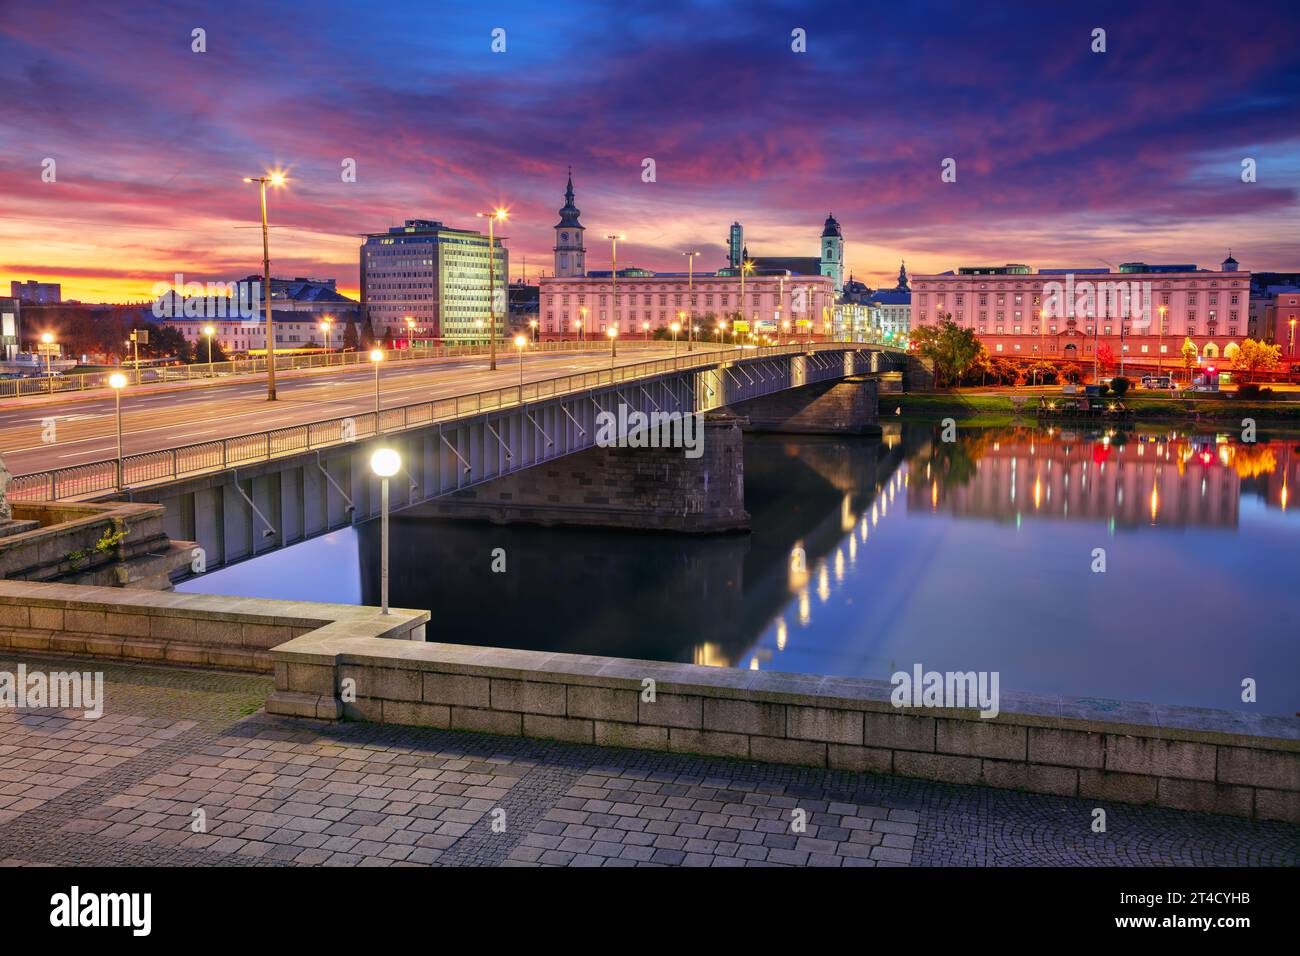 Linz, Austria. Cityscape image of riverside Linz, Austria at autumn sunrise with reflection of the city lights in Danube River. Stock Photo